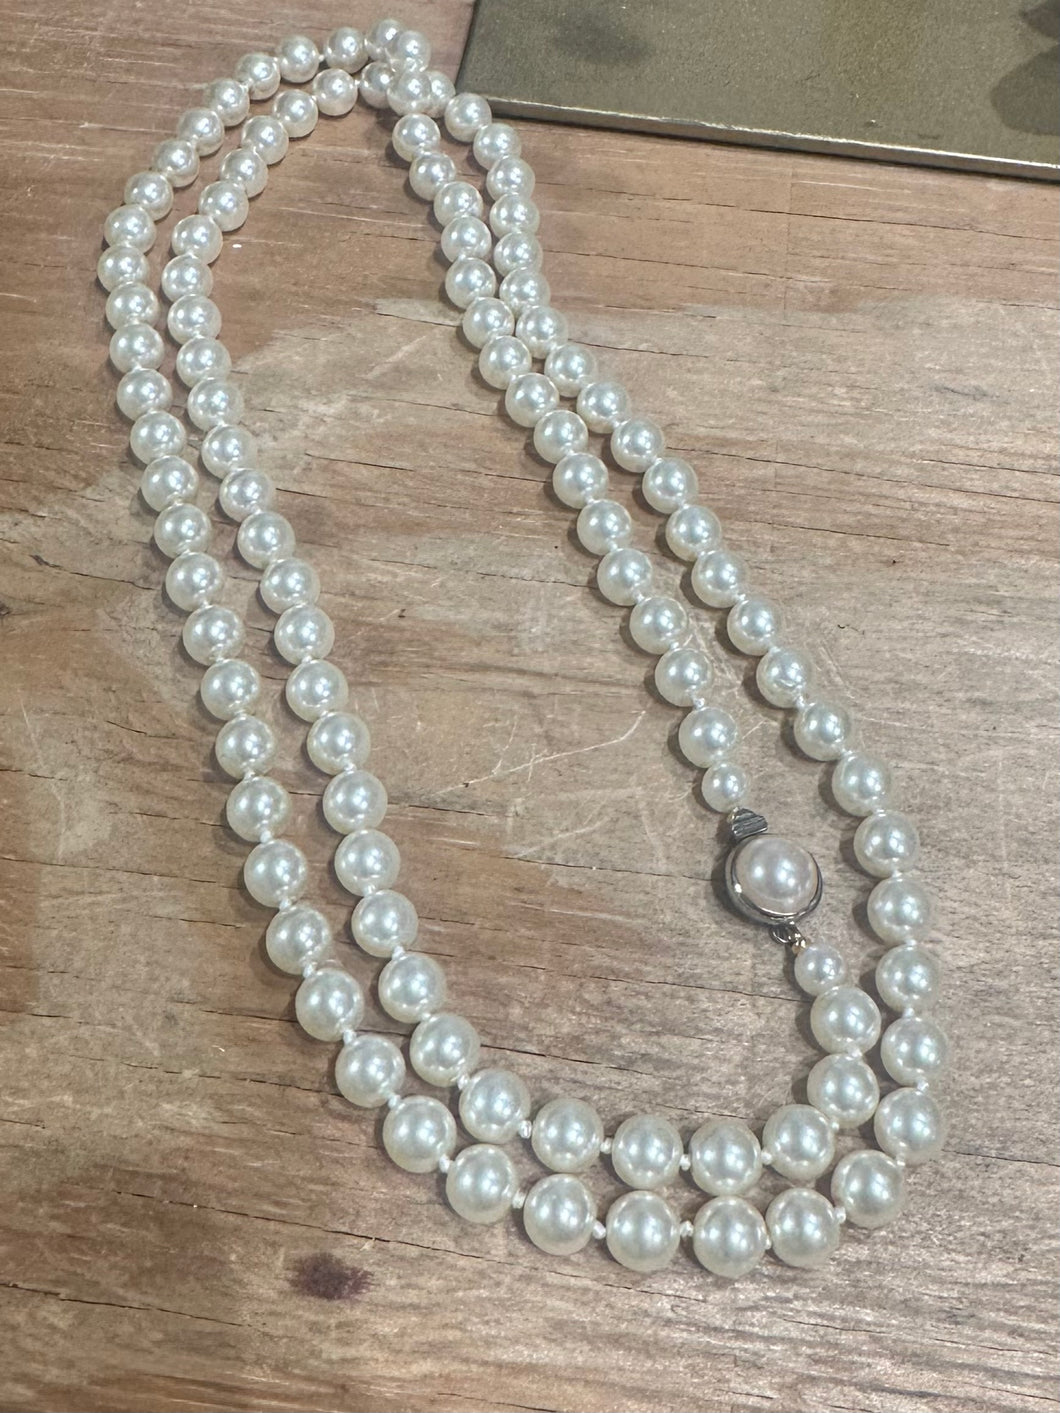 Knotted vintage pearls